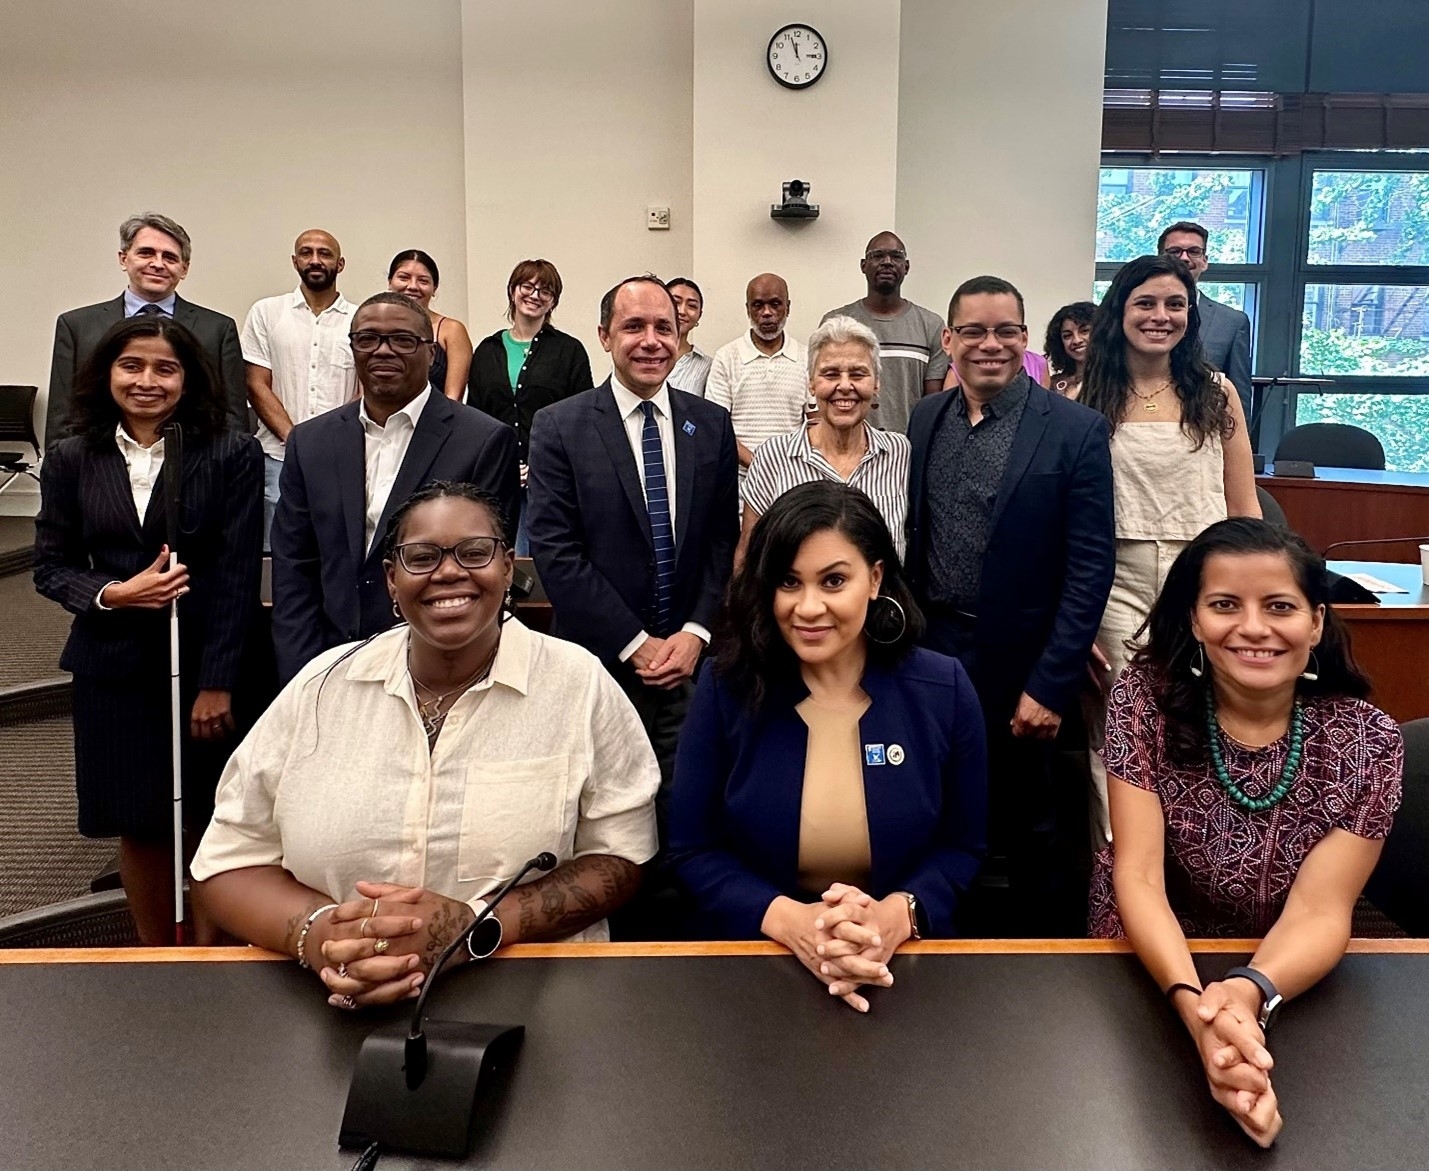 Director Rossi and participants of the informal listening session convened by the Robert and Helen Bernstein Institute for Human Rights at New York University School of Law.